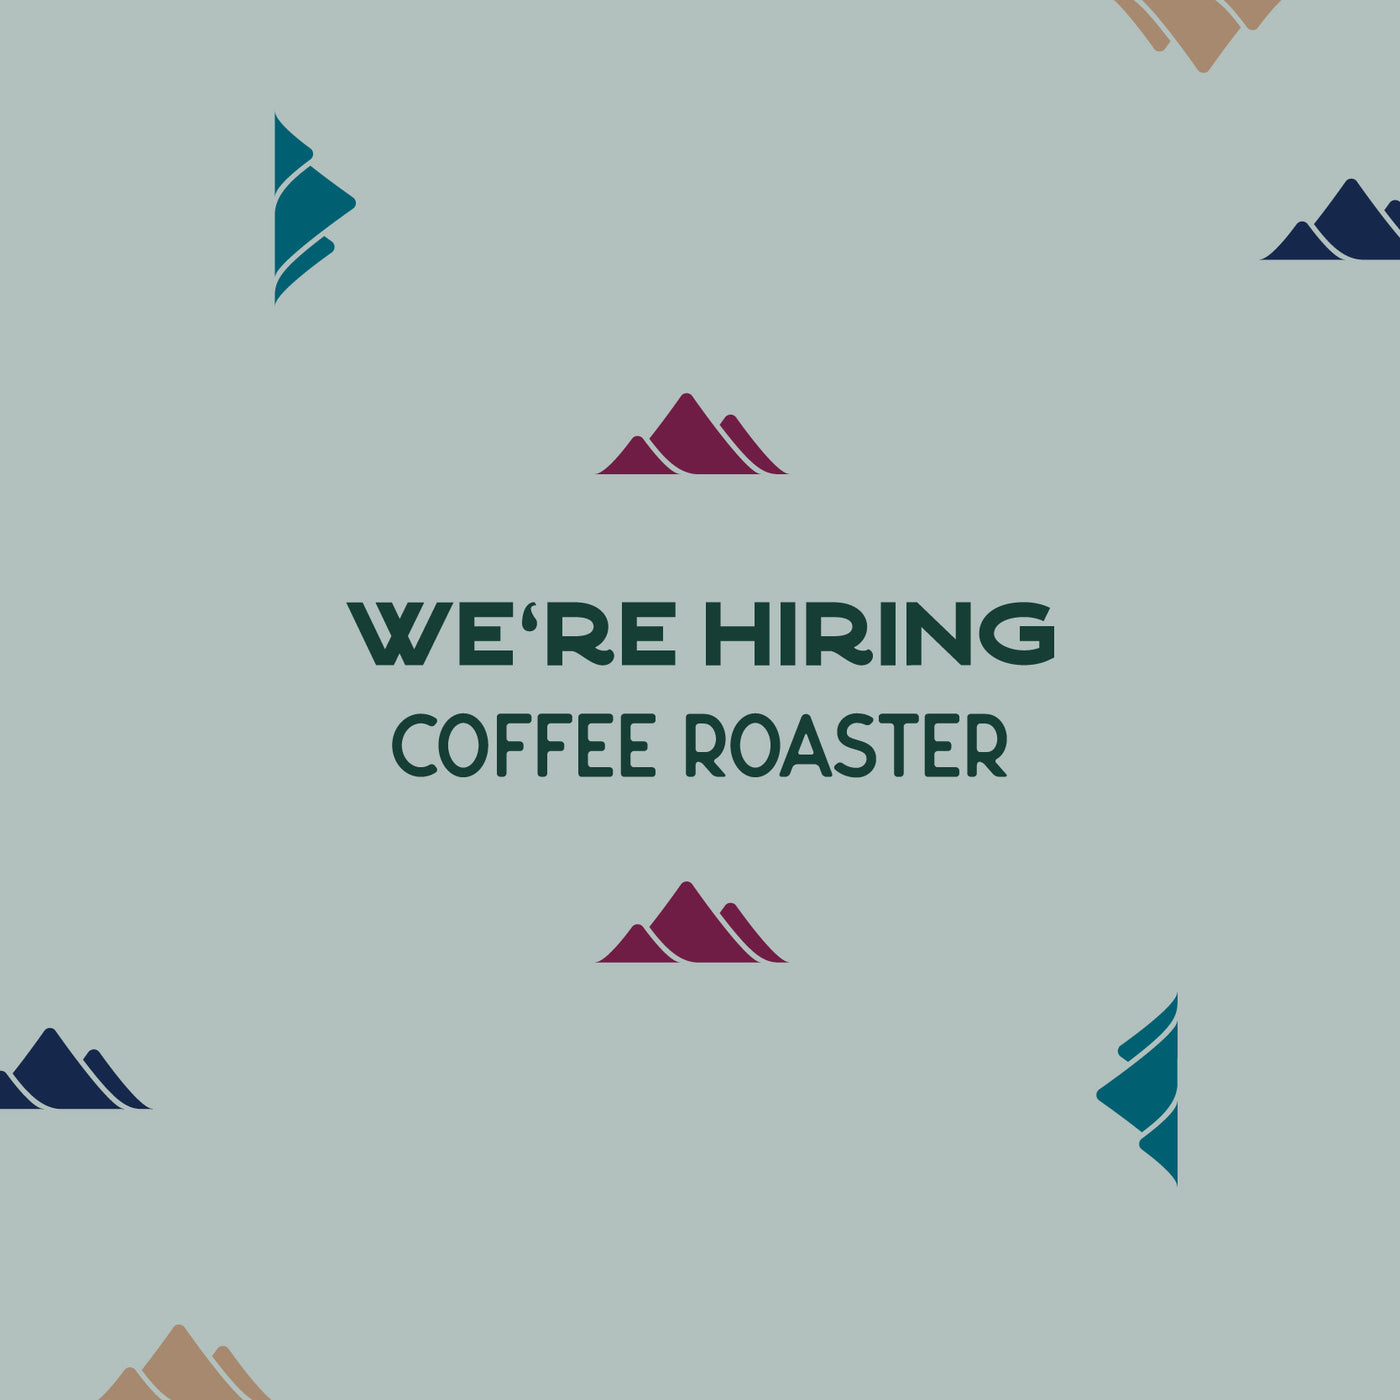 We're Hiring! Join us as a Coffee Roaster